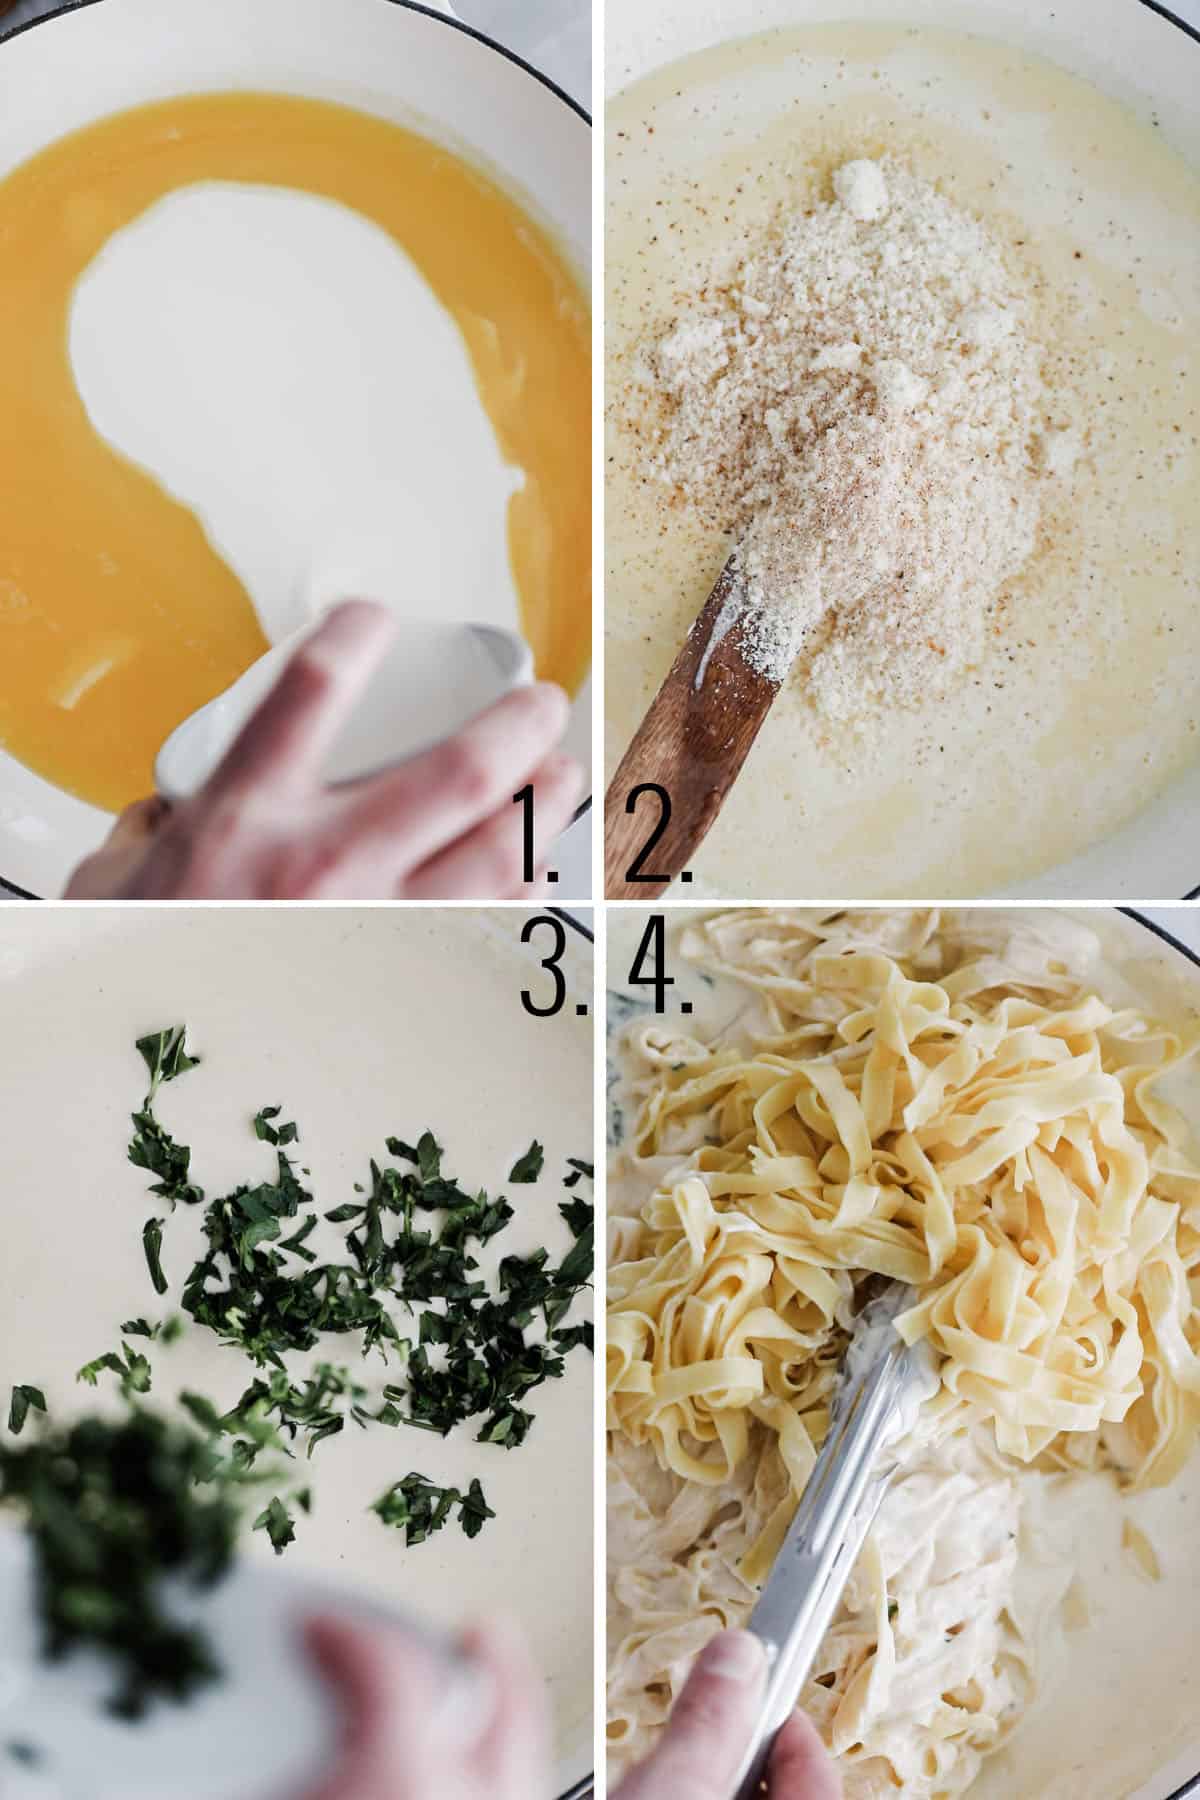 Four photos showing process shots for making homemade Alfredo sauce and combining to make fettuccine Alfredo. 